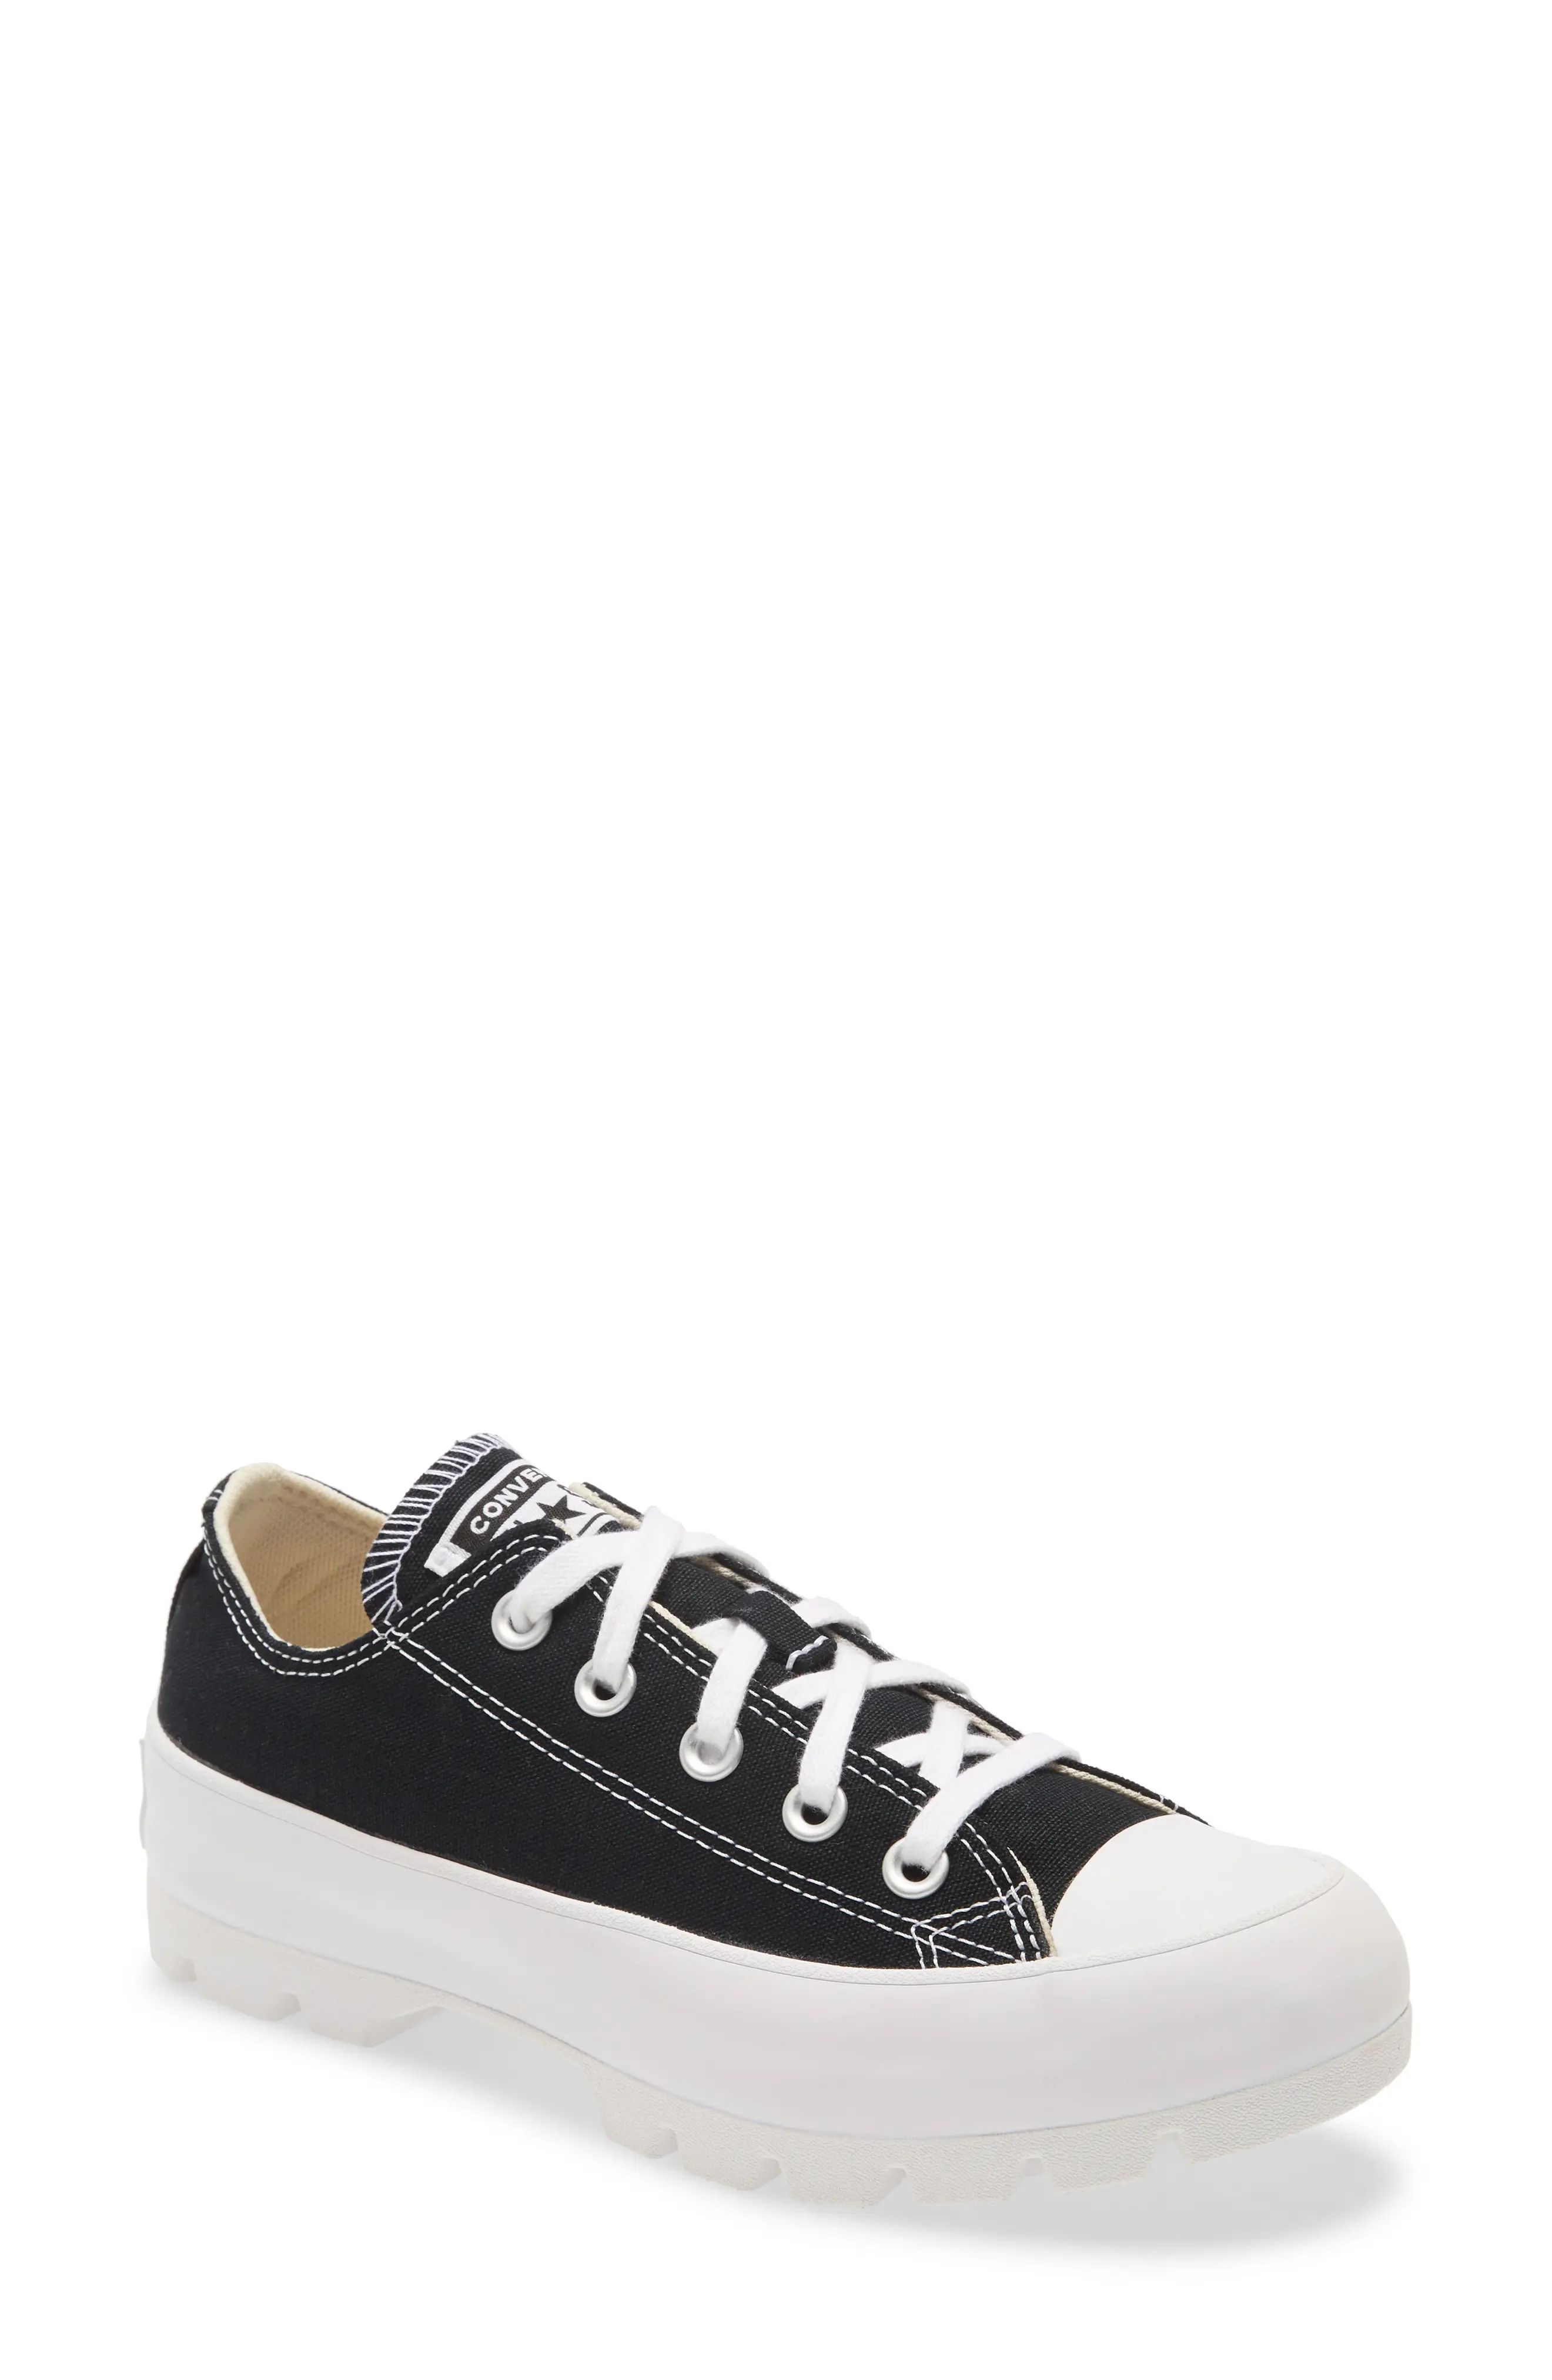 Women's Converse Chuck Taylor All Star Lugged Low Top Sneaker, Size 6 M - Black | Nordstrom